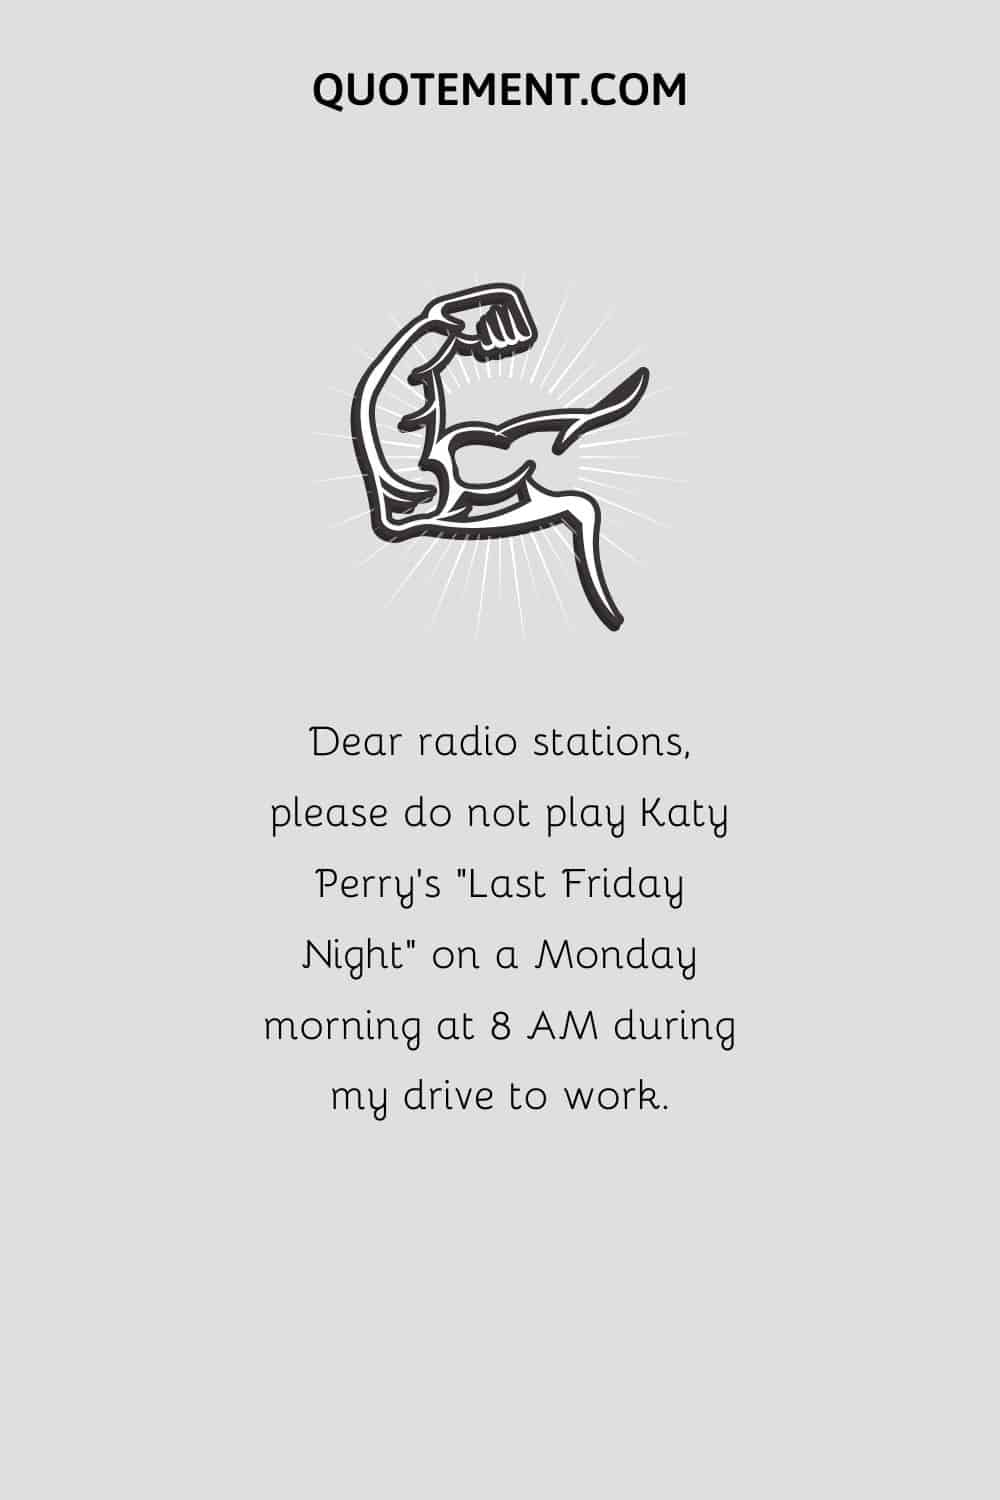 Dear radio stations, please do not play Katy Perry’s “Last Friday Night” on a Monday morning at 8 AM during my drive to work